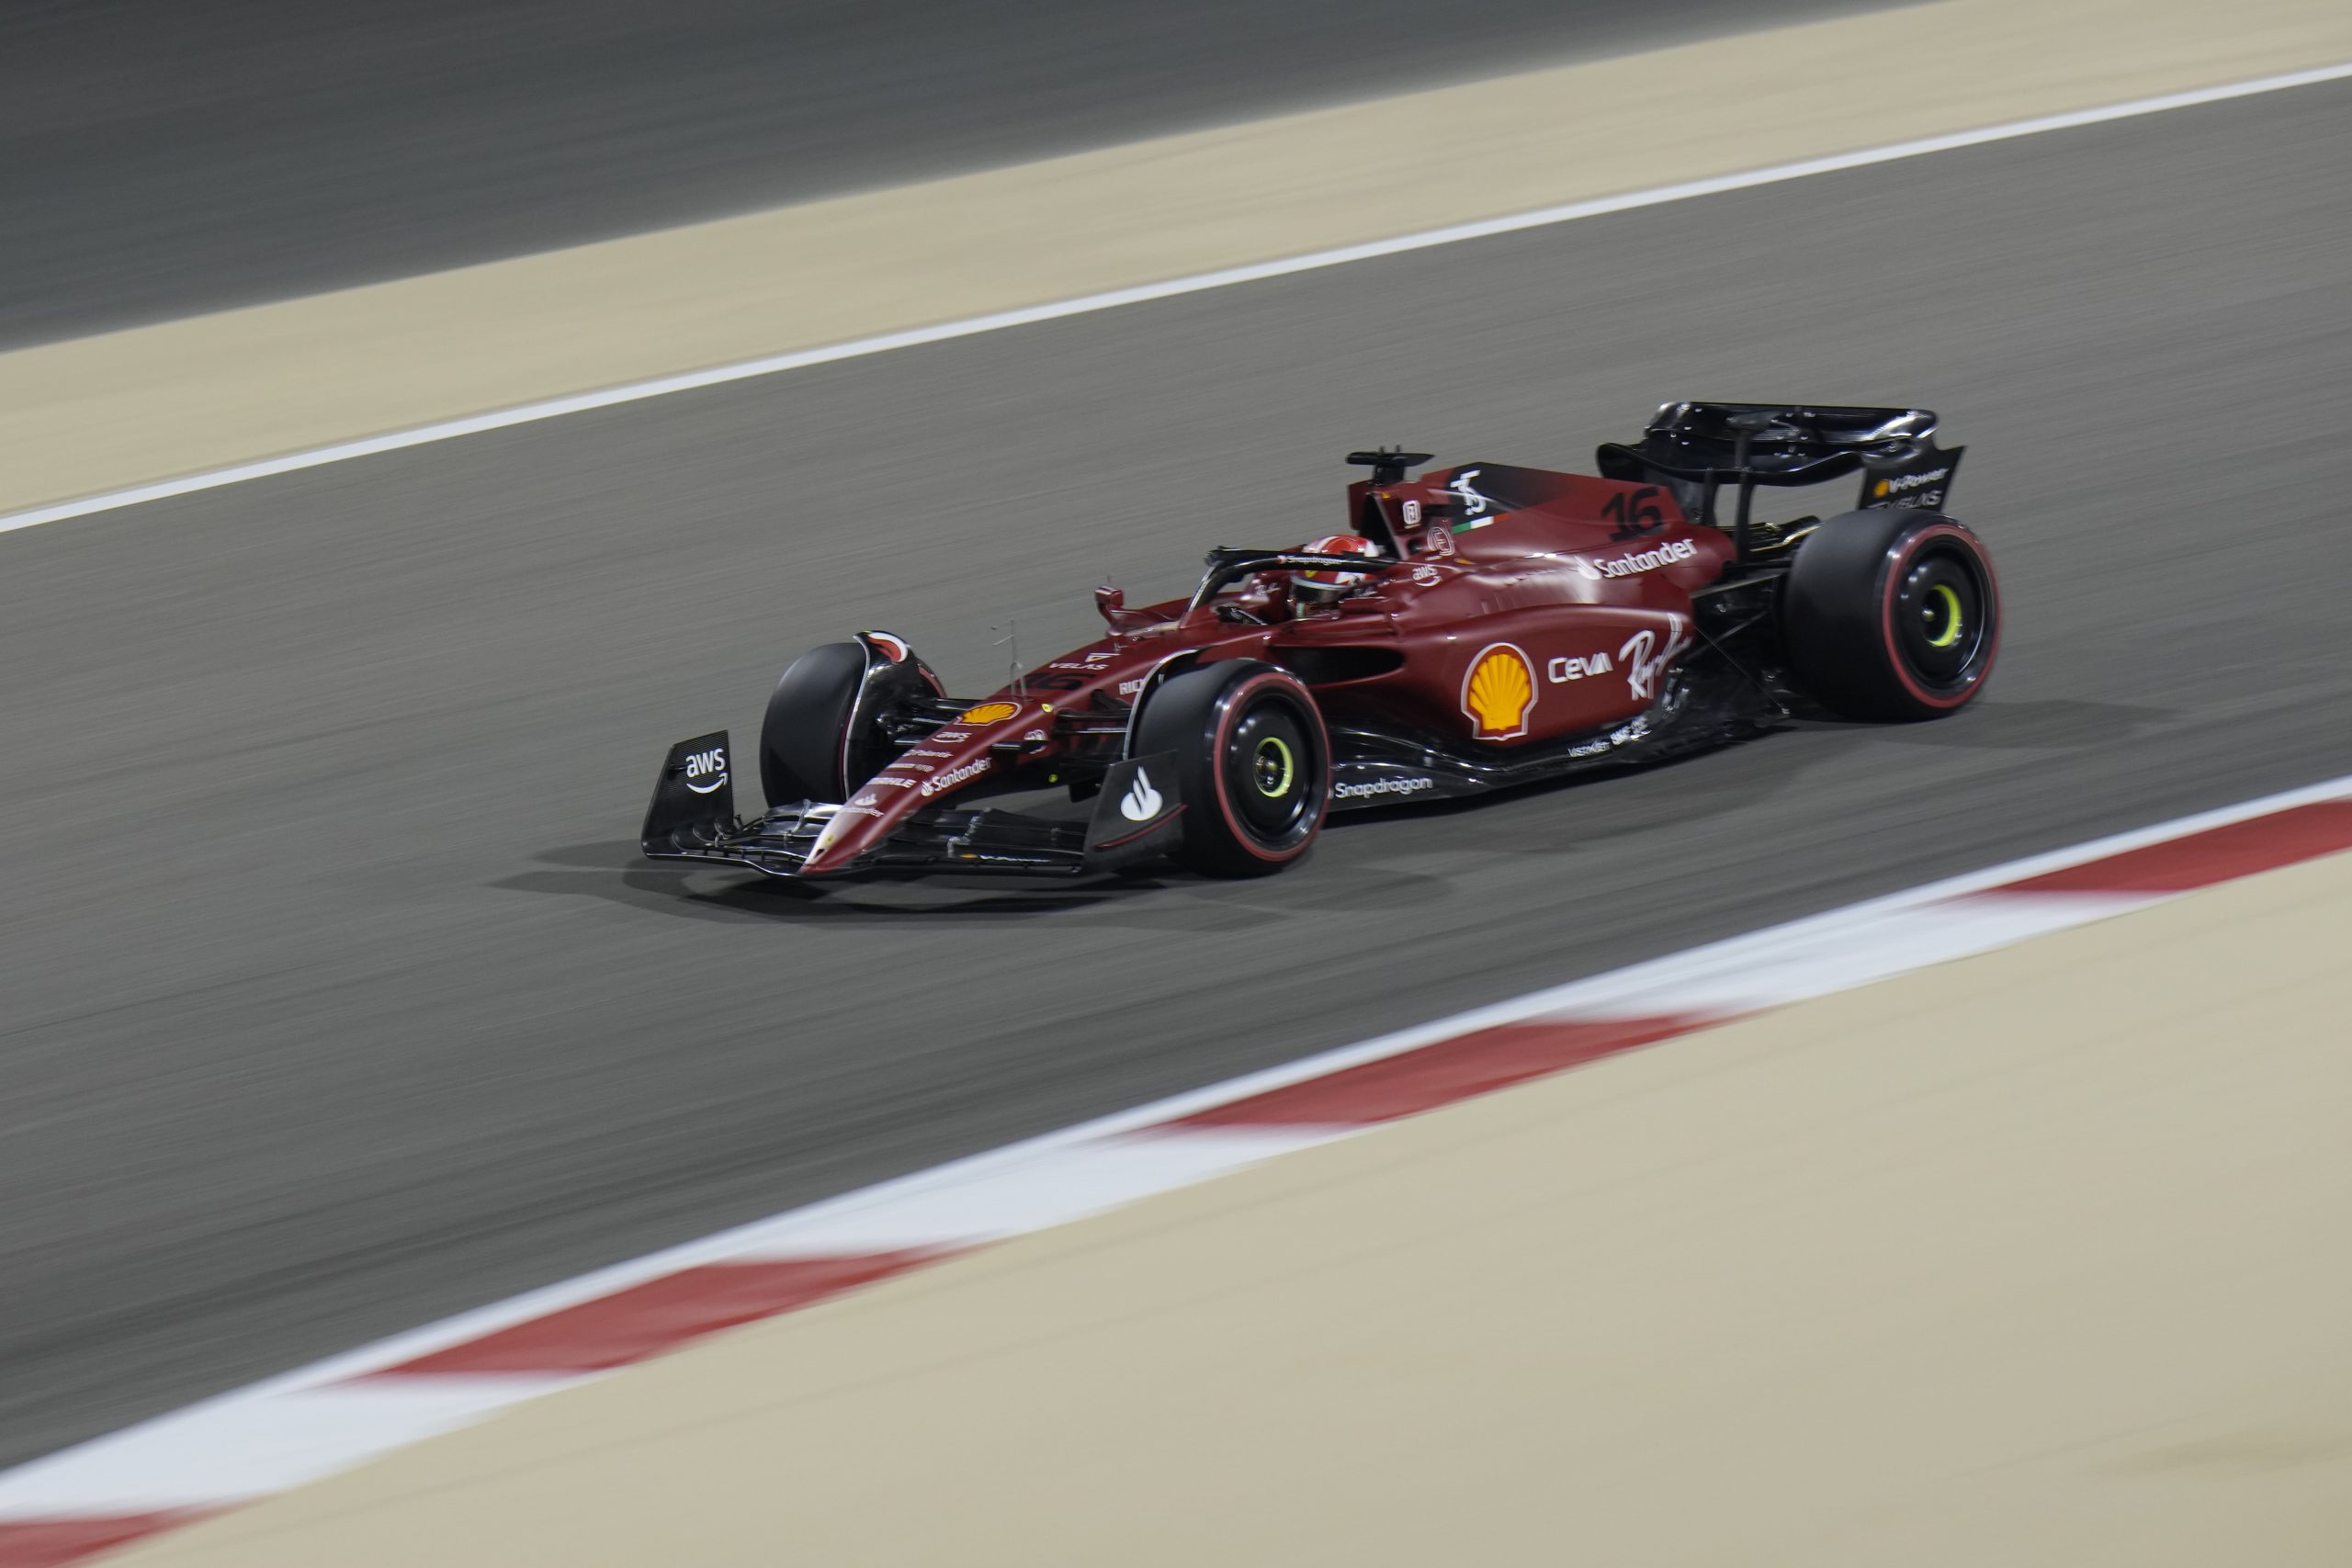 Top bets and props for the F1 Bahrain GP